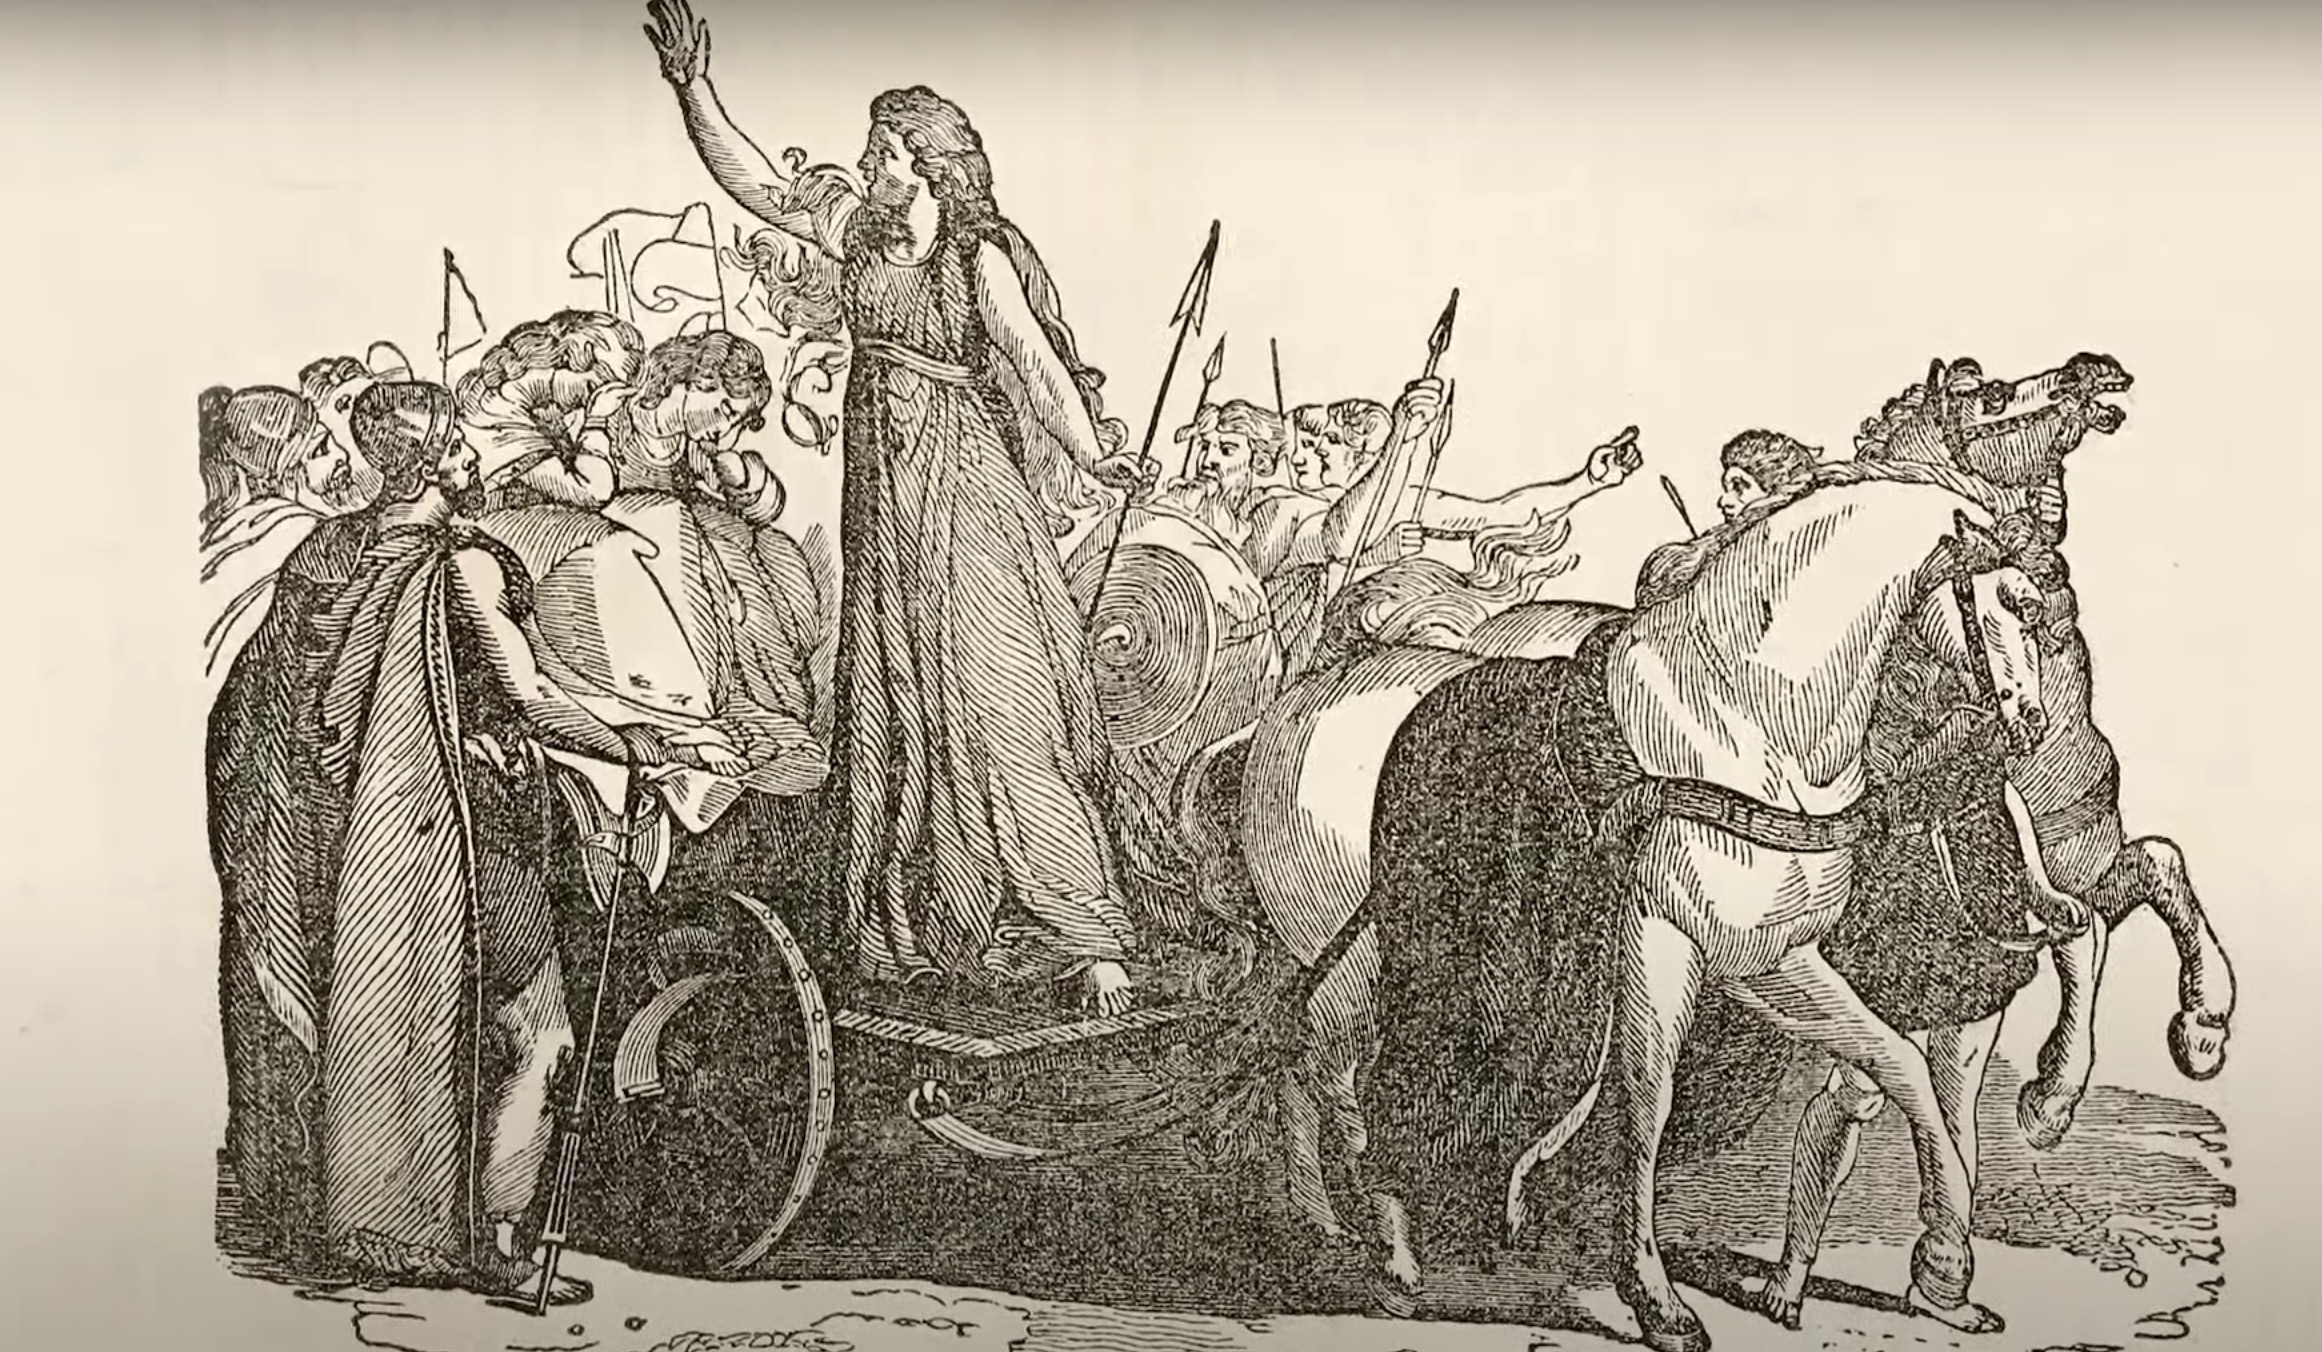 Boudica rallying her forces